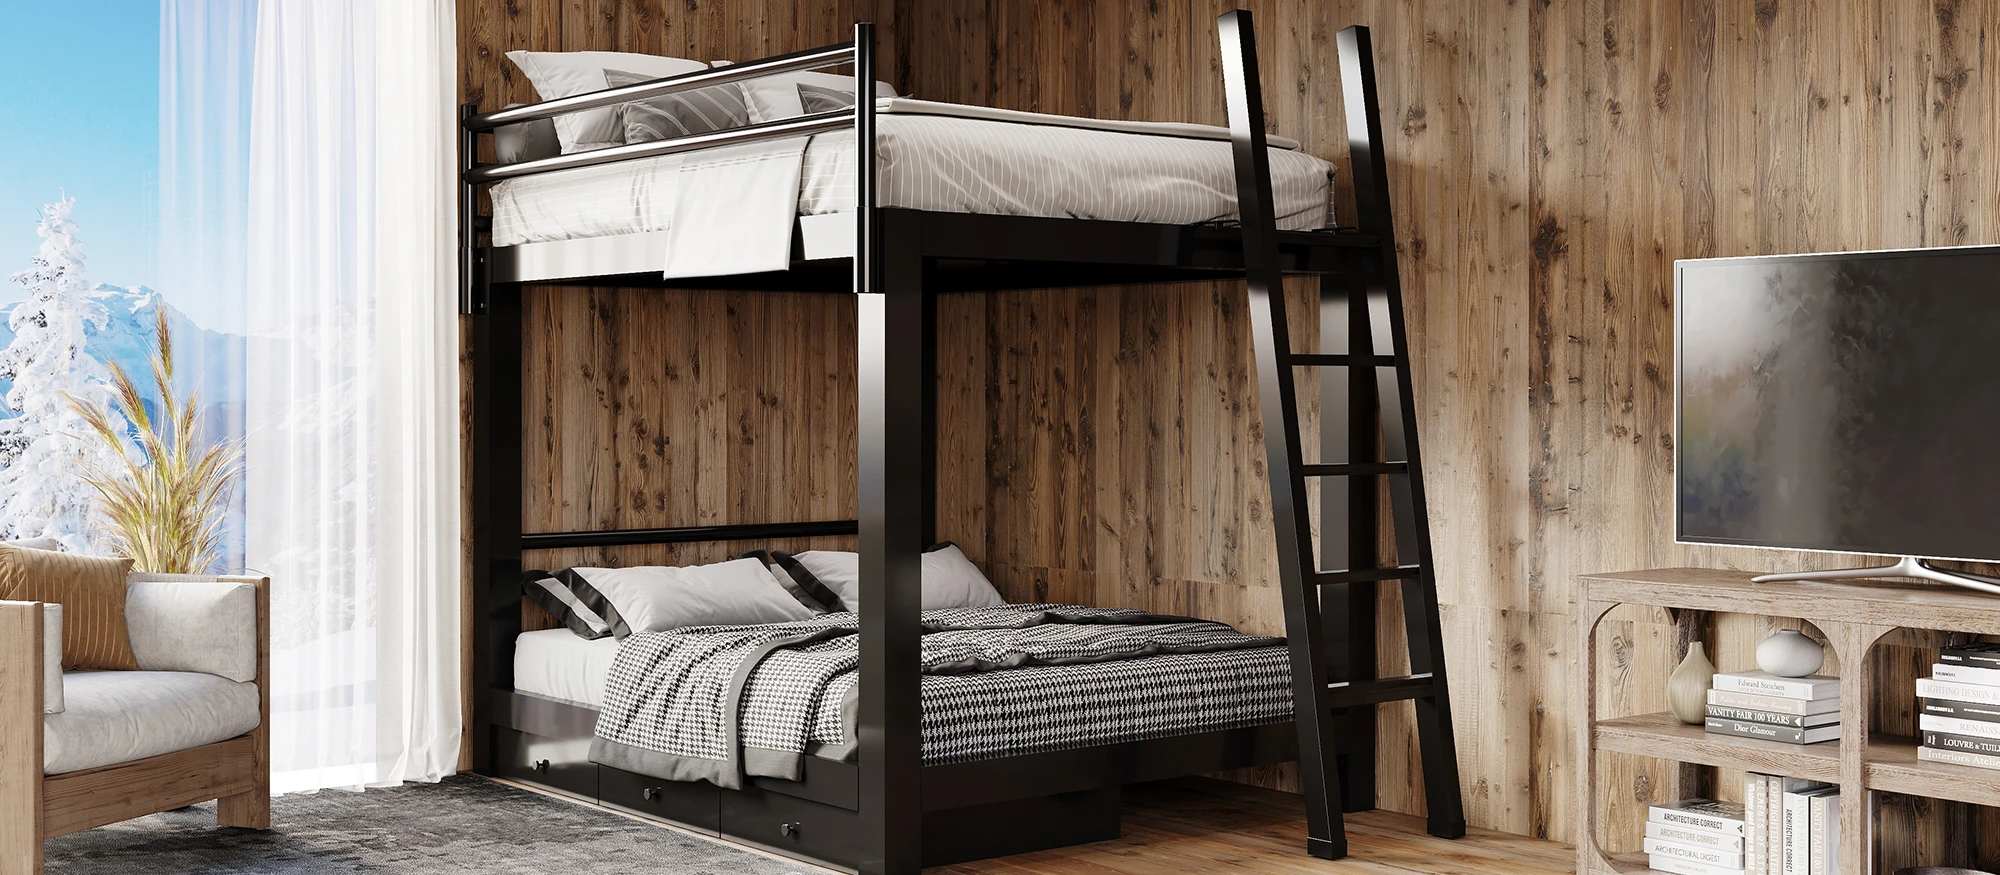 Black Queen Over Queen Bunk Bed for Adults in an upscale mountain home bedroom with wood paneled walls seen from the lower right-hand corner of the bed away from the wall.